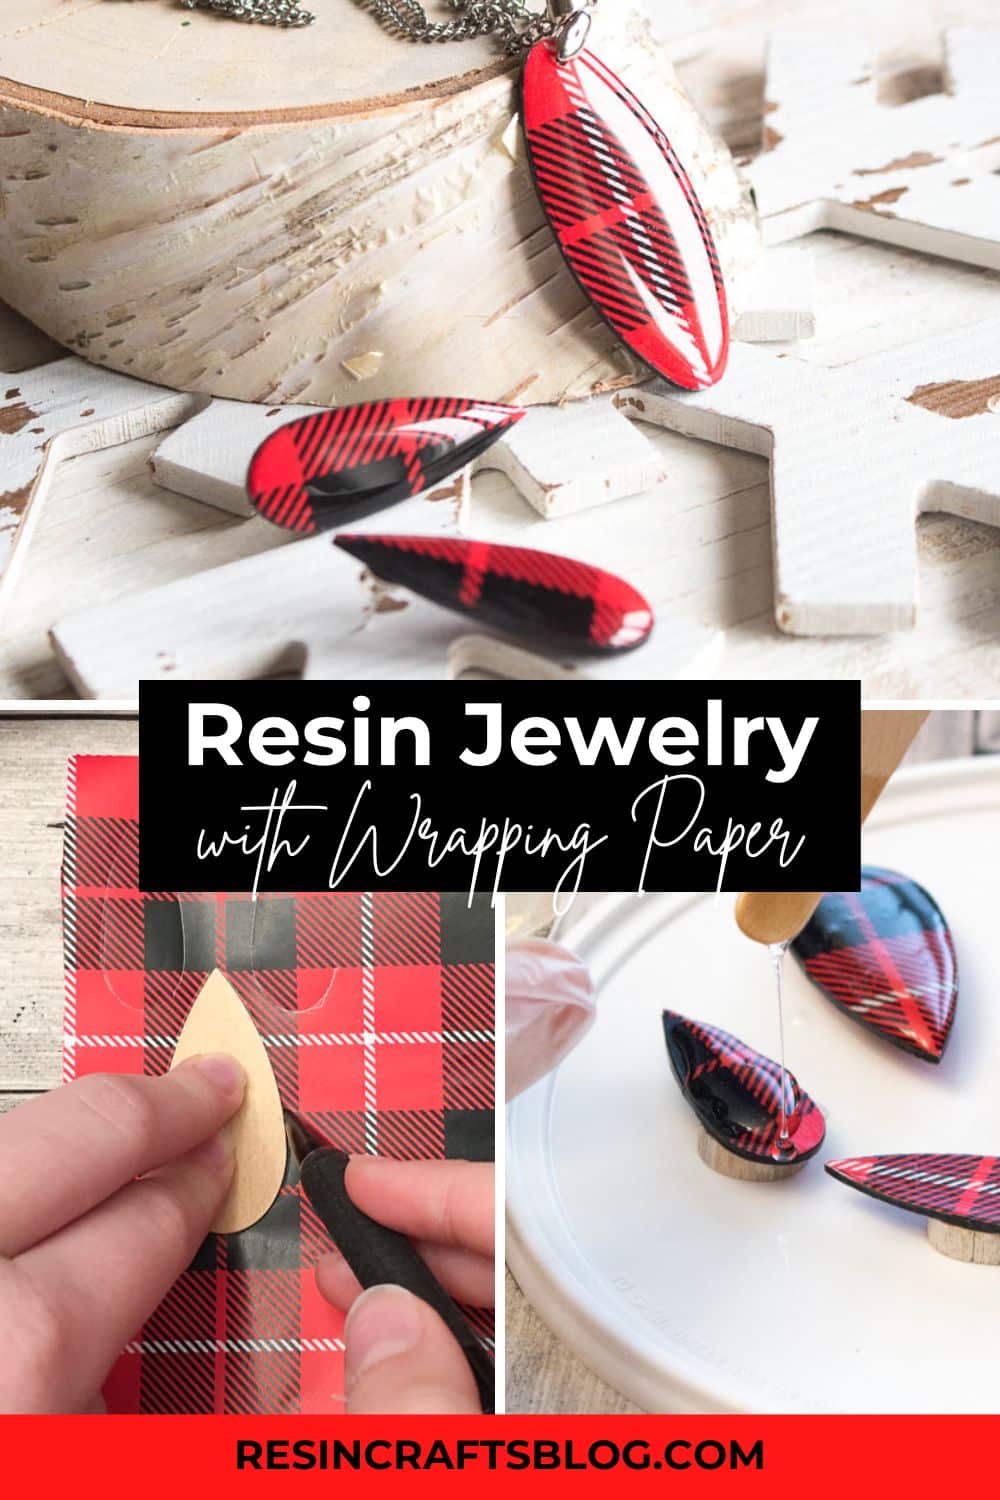 DIY Resin Jewelry made with Gift Wrap via @resincraftsblog